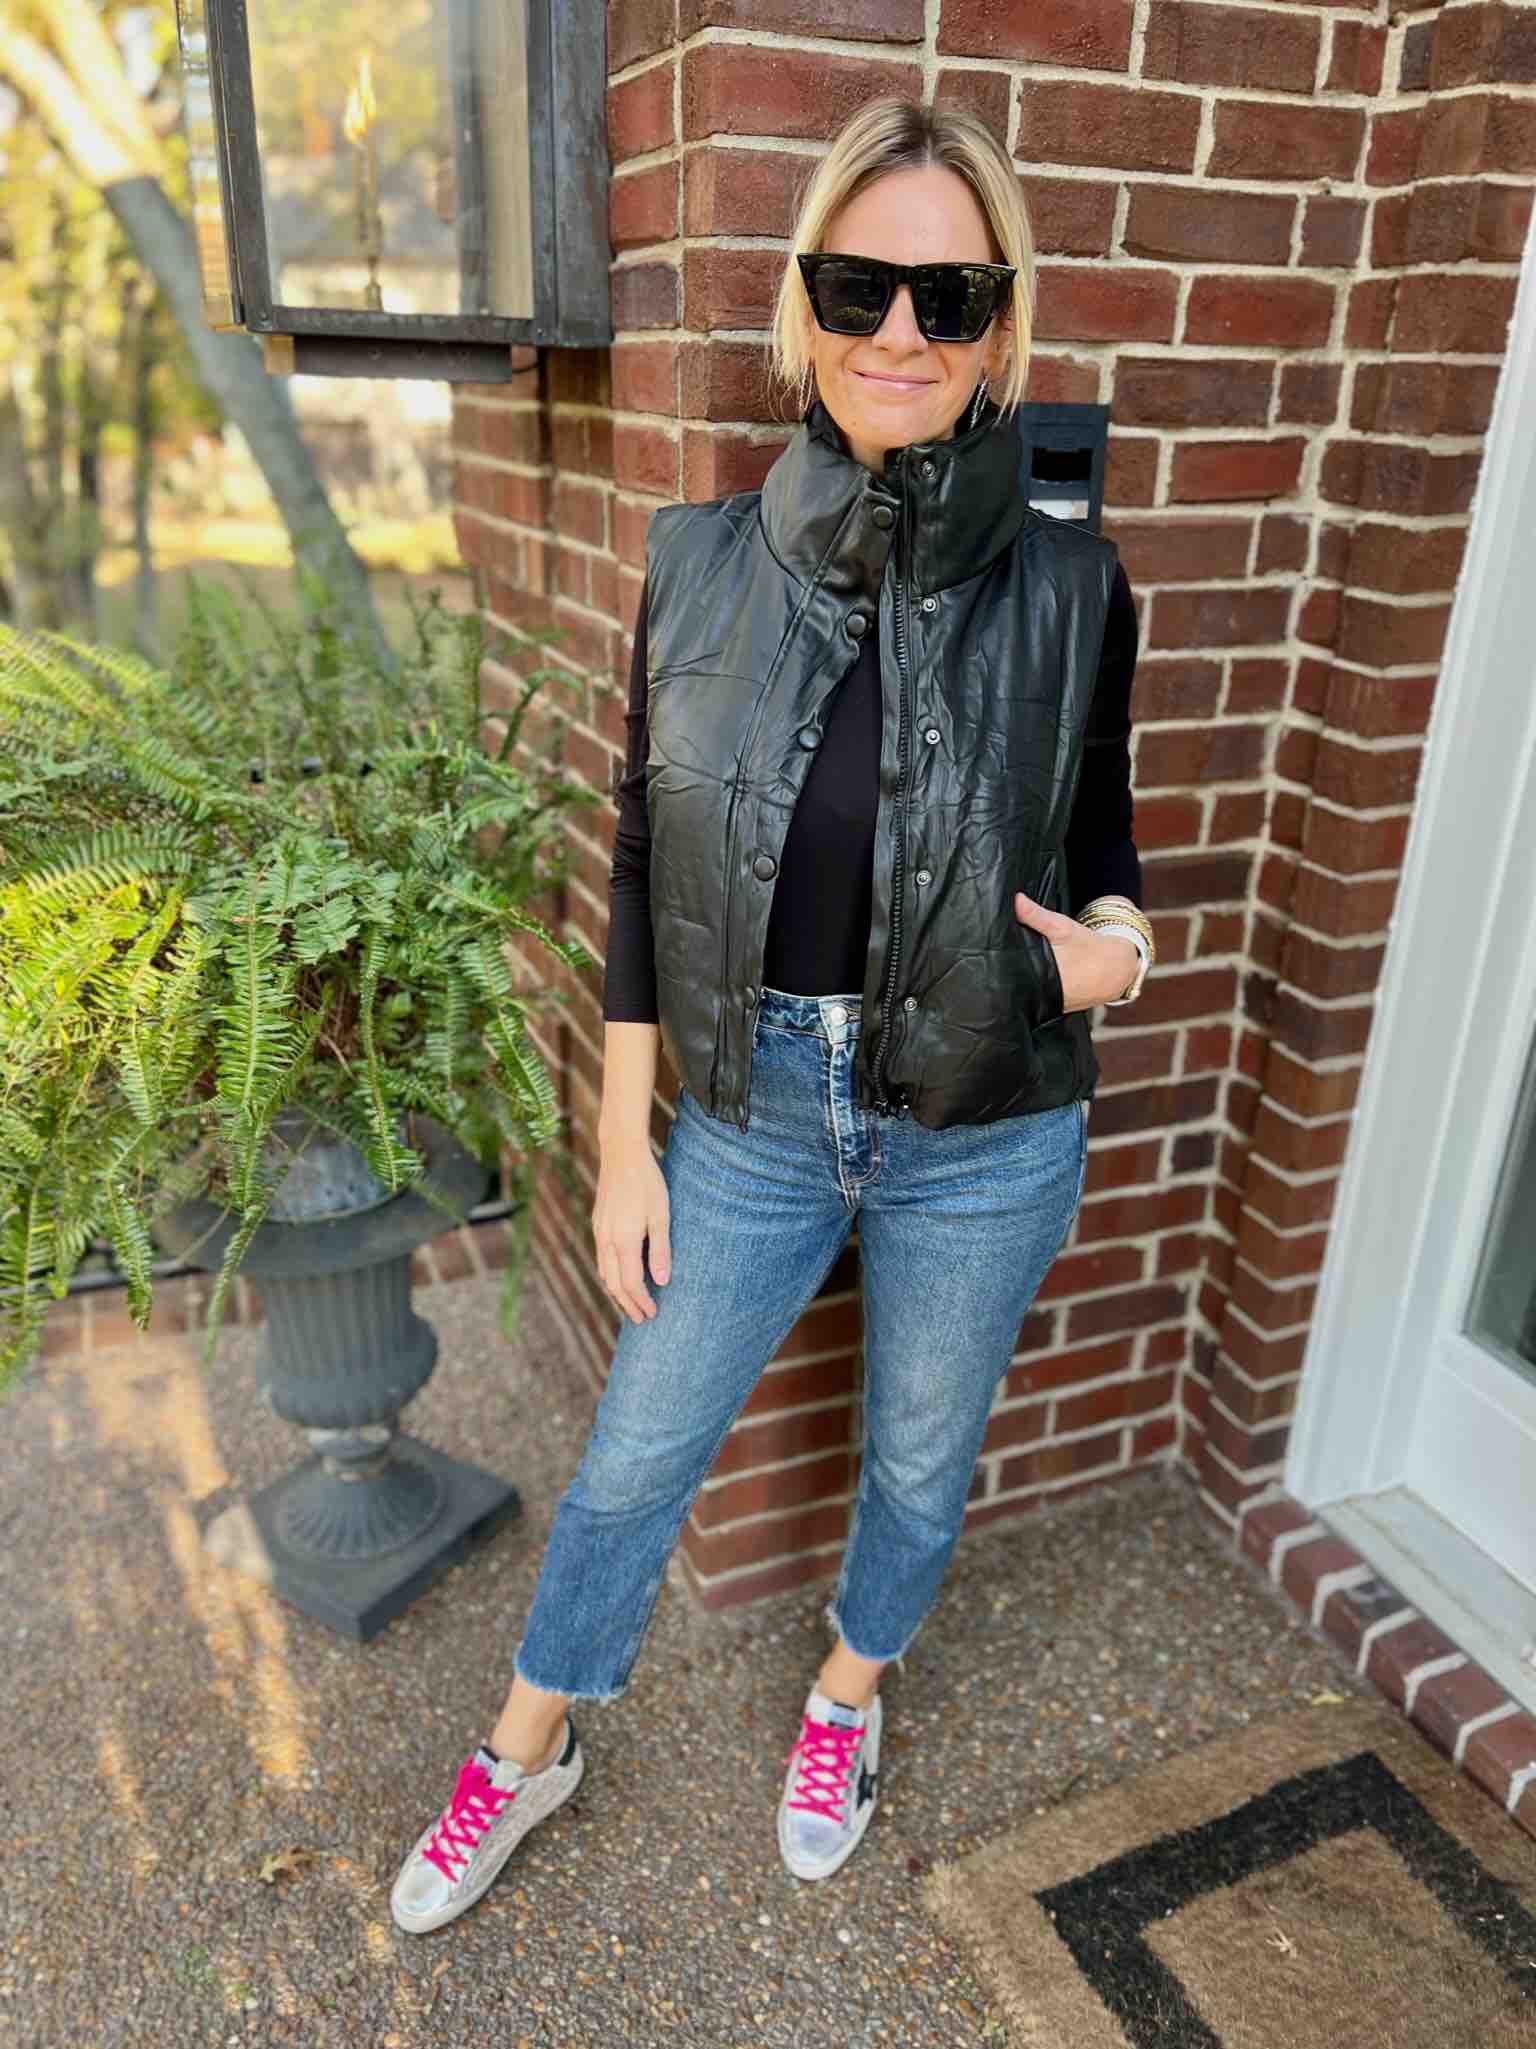 10 Ways To Wear A Bodysuit This Fall personal stylists share styled looks with bodysuits nashville stylists share style inspo for bodysuits Faux Leather Vest & Bodysuit & Jeans how to layer a bodysuit under a vest how to wear a bodysuit with jeans